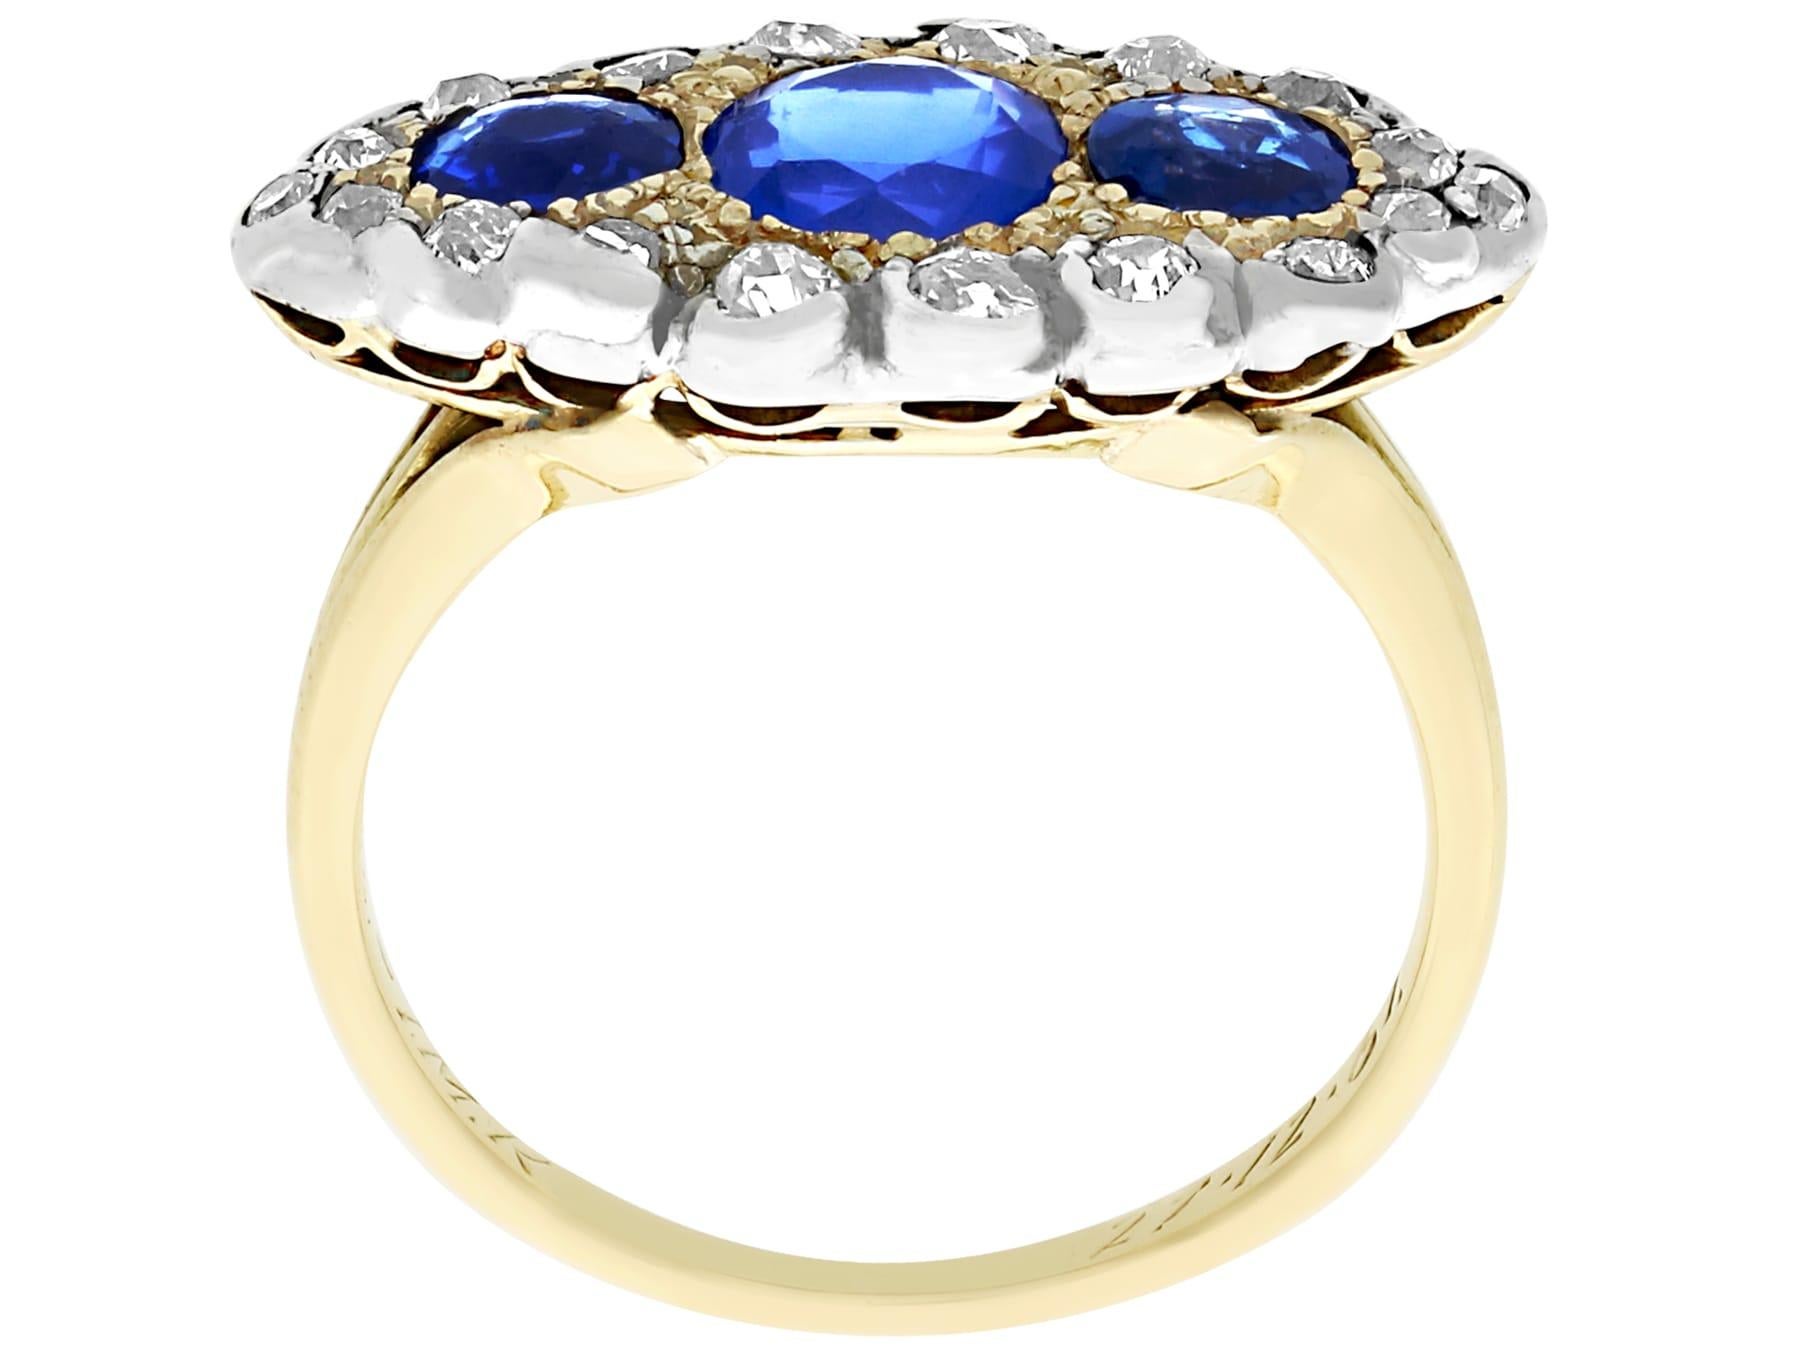 Antique 1.48 Carat Sapphire 1.04 Carat Diamond Ring in Yellow Gold For Sale 1